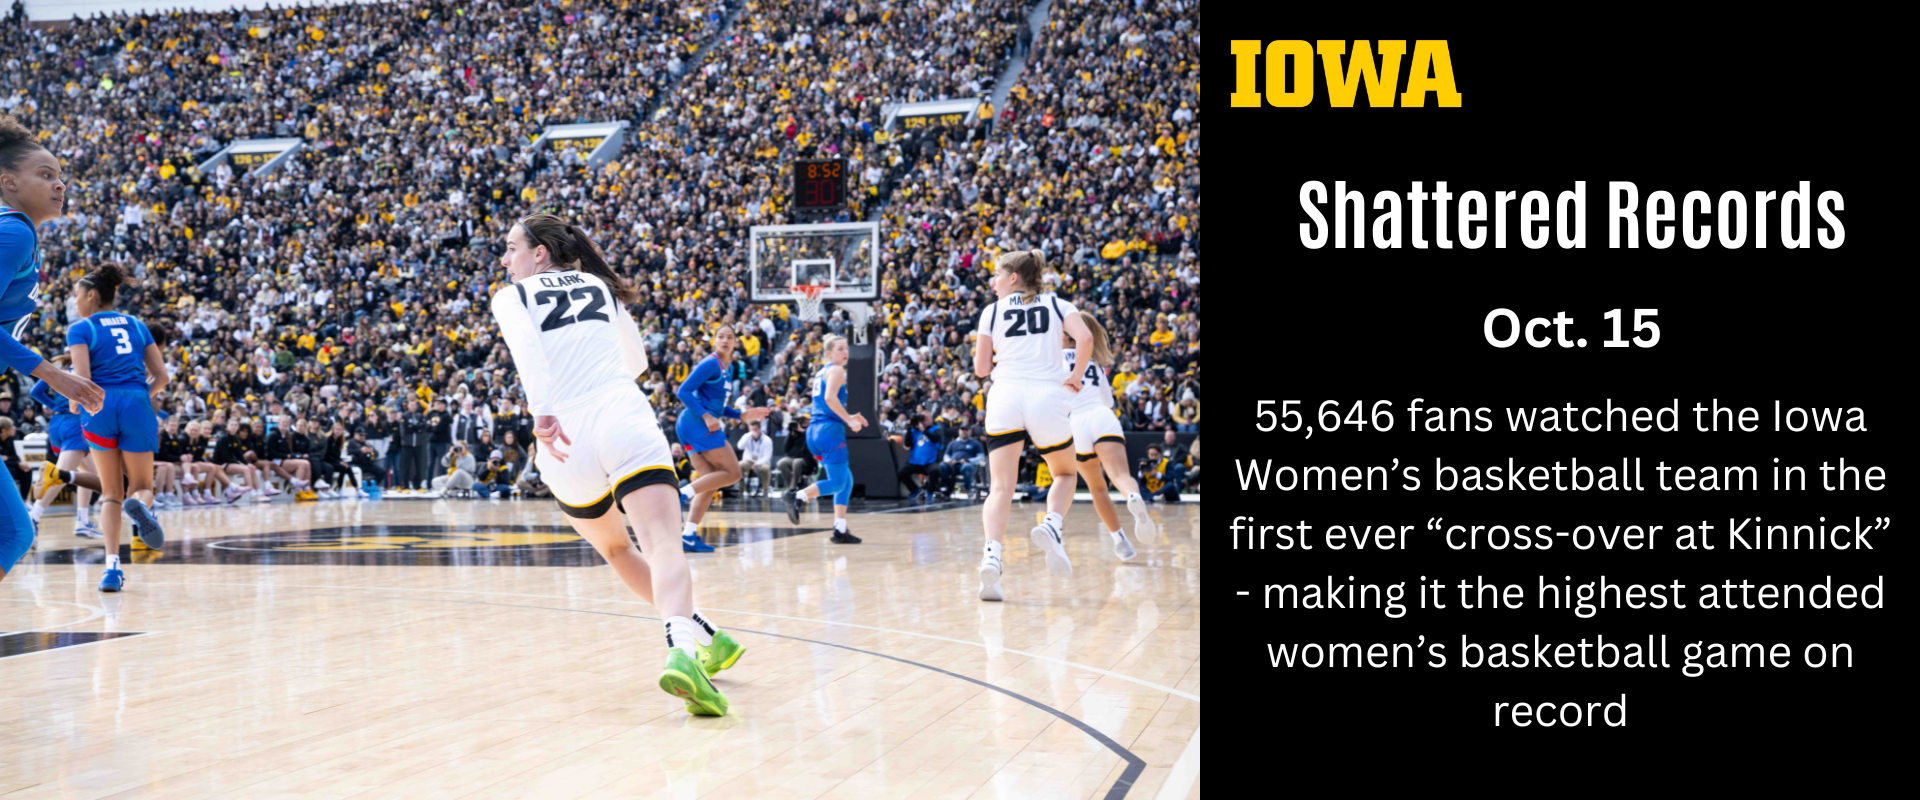 Iowa Women's basketball game record turn out